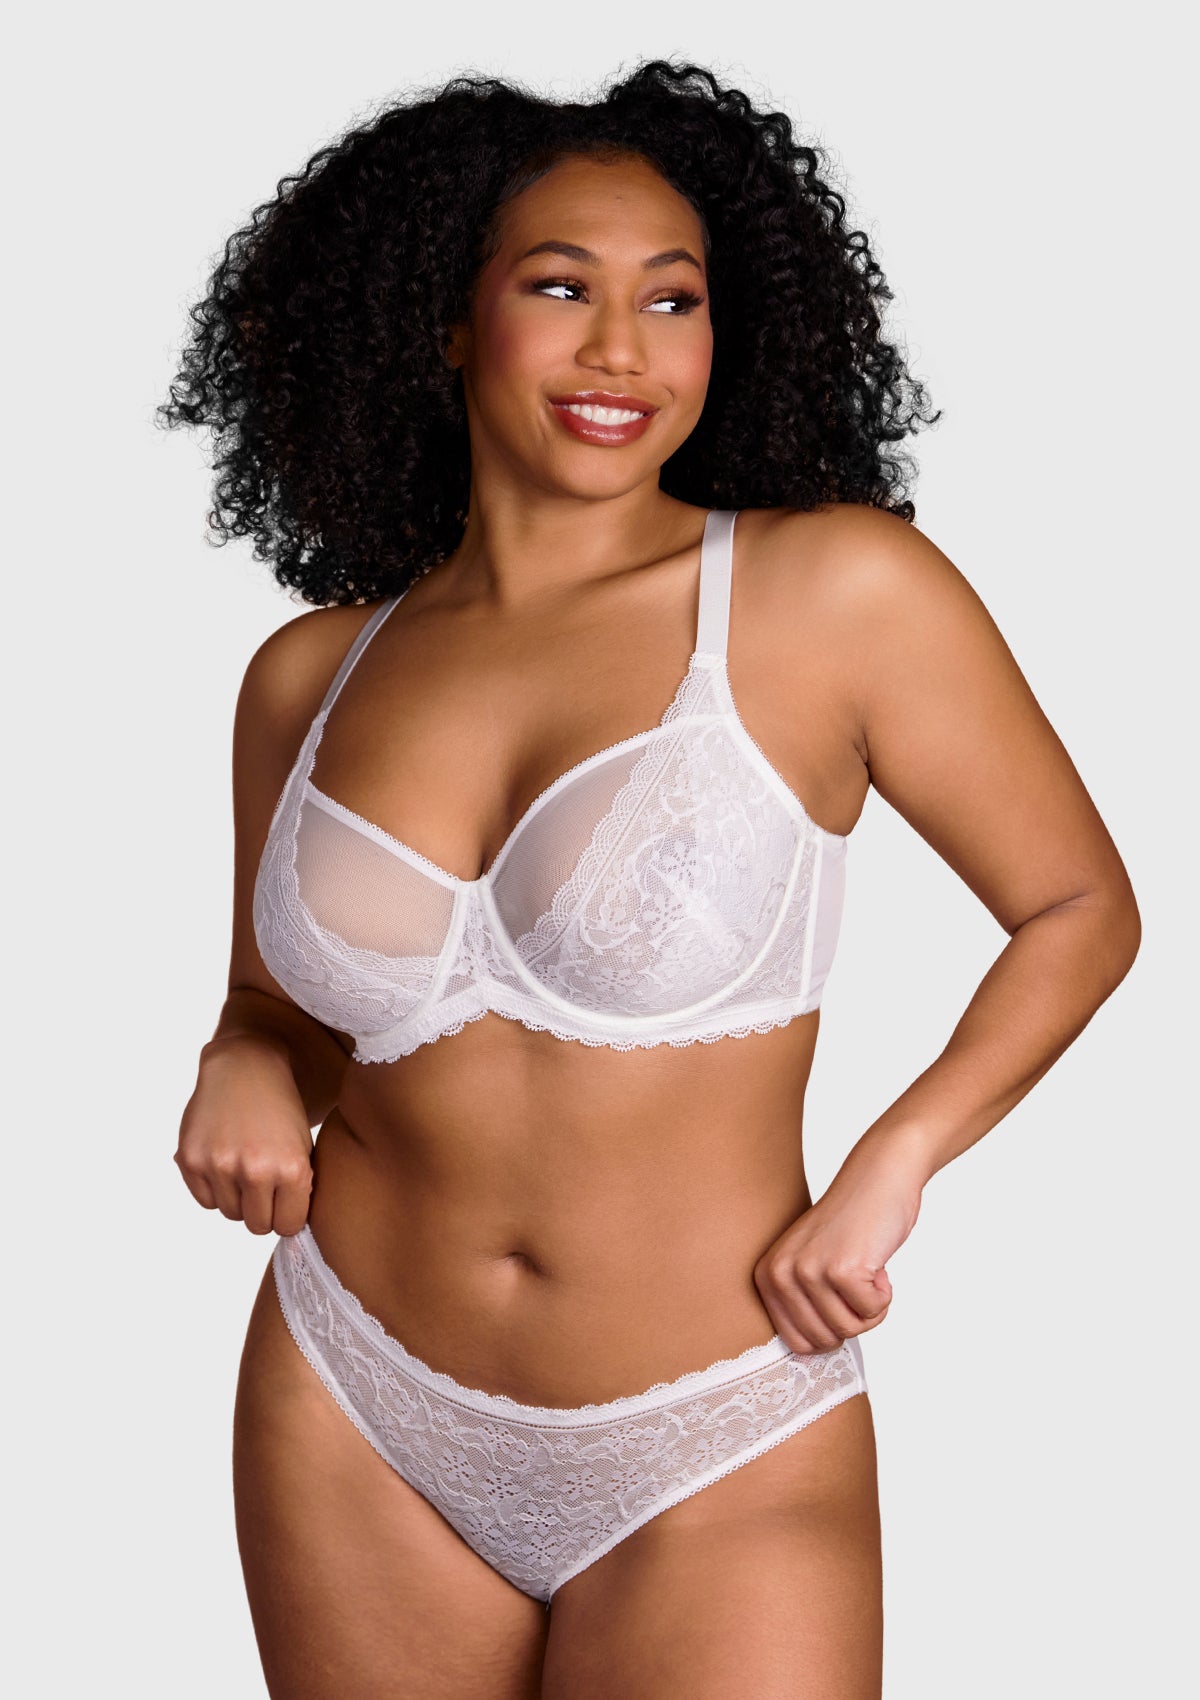 HSIA Anemone Big Bra: Best Bra For Lift And Support, Floral Bra - Light Blue / 34 / D